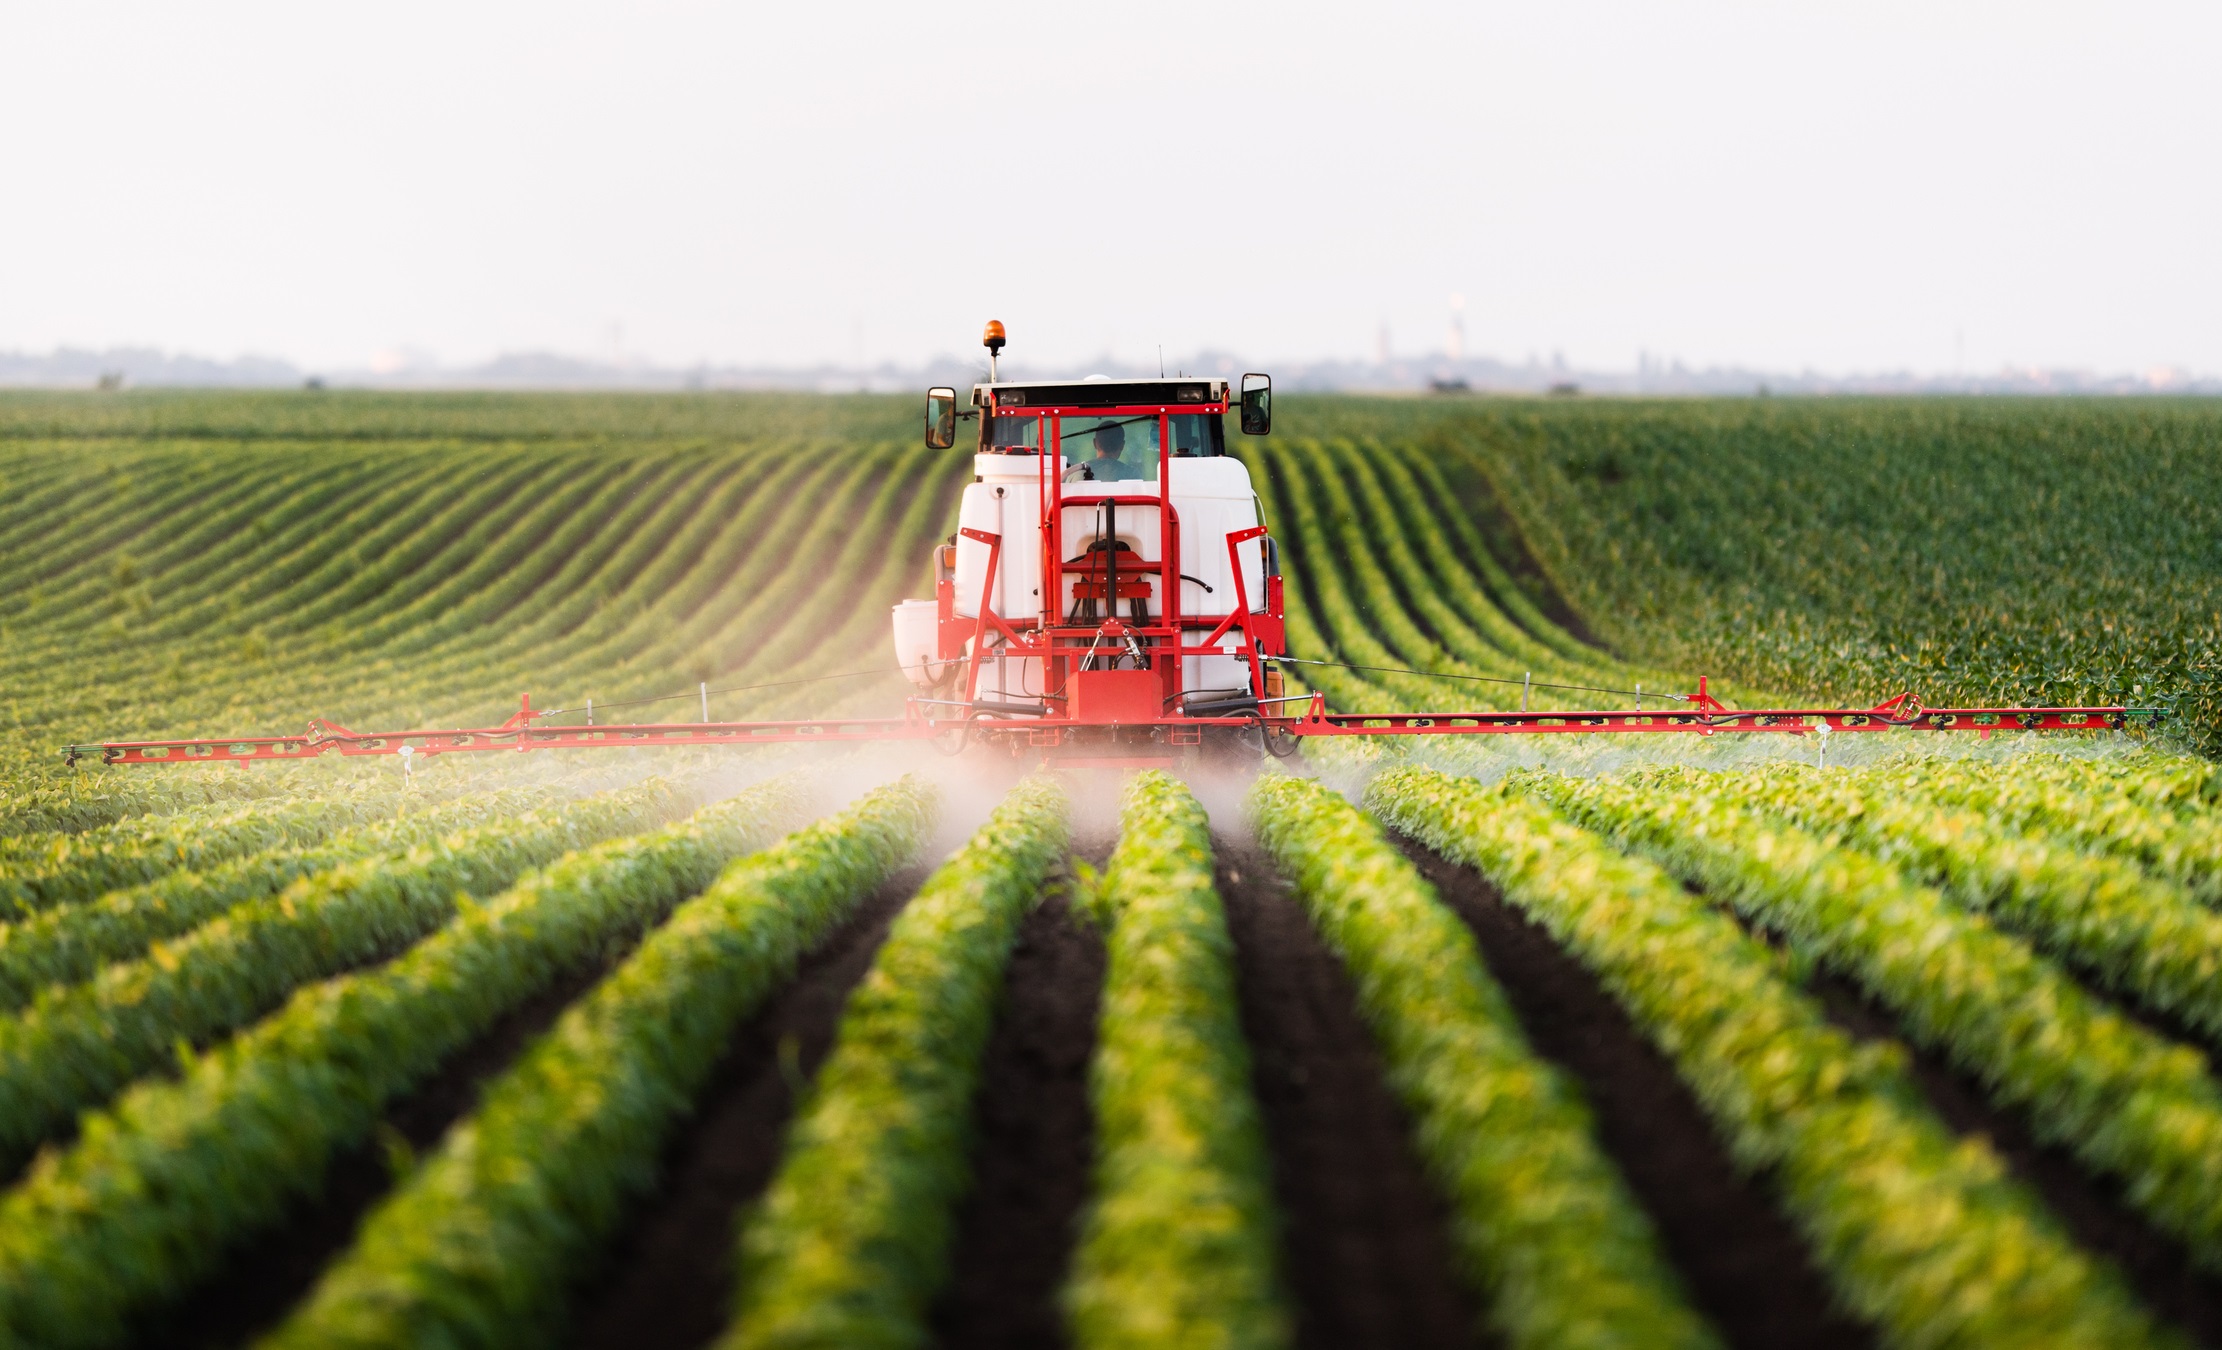 Tractor spraying pesticide in field